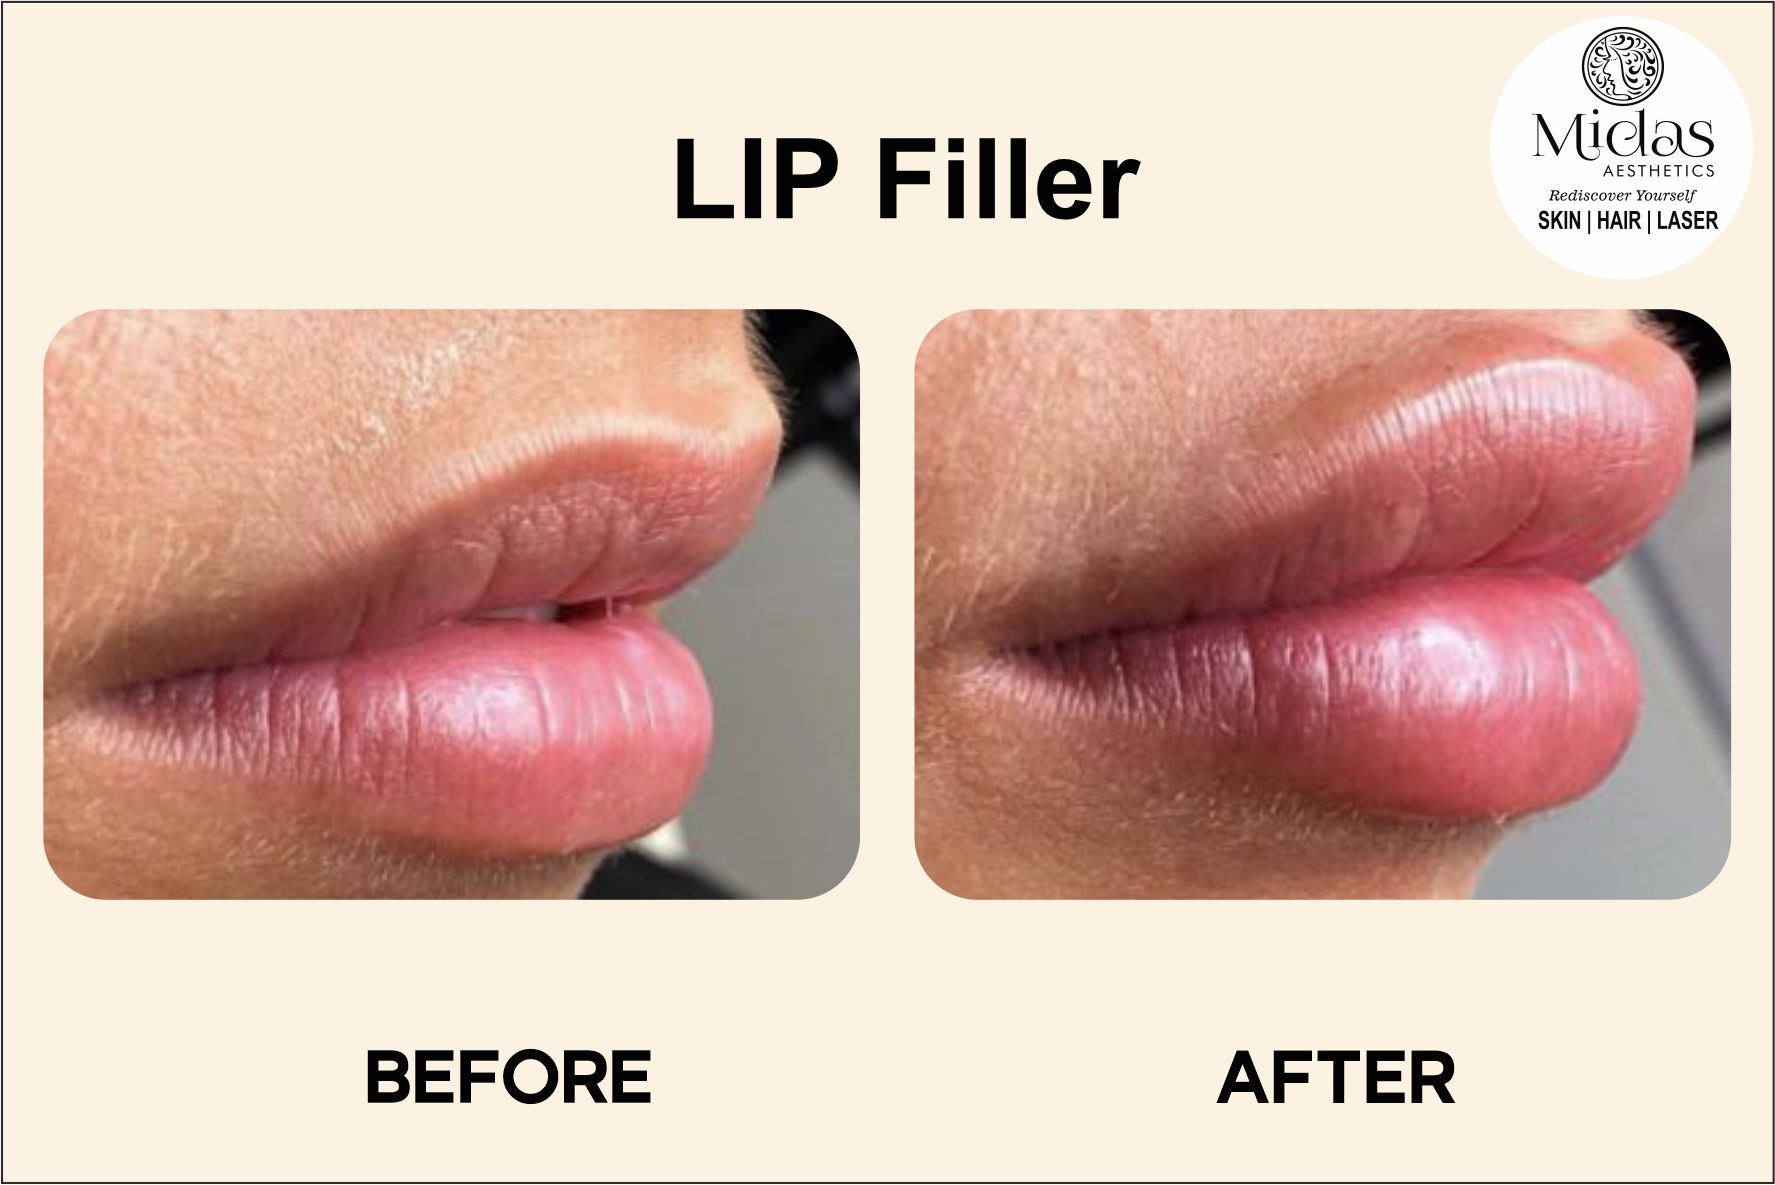 Lip filler treatment before and after images